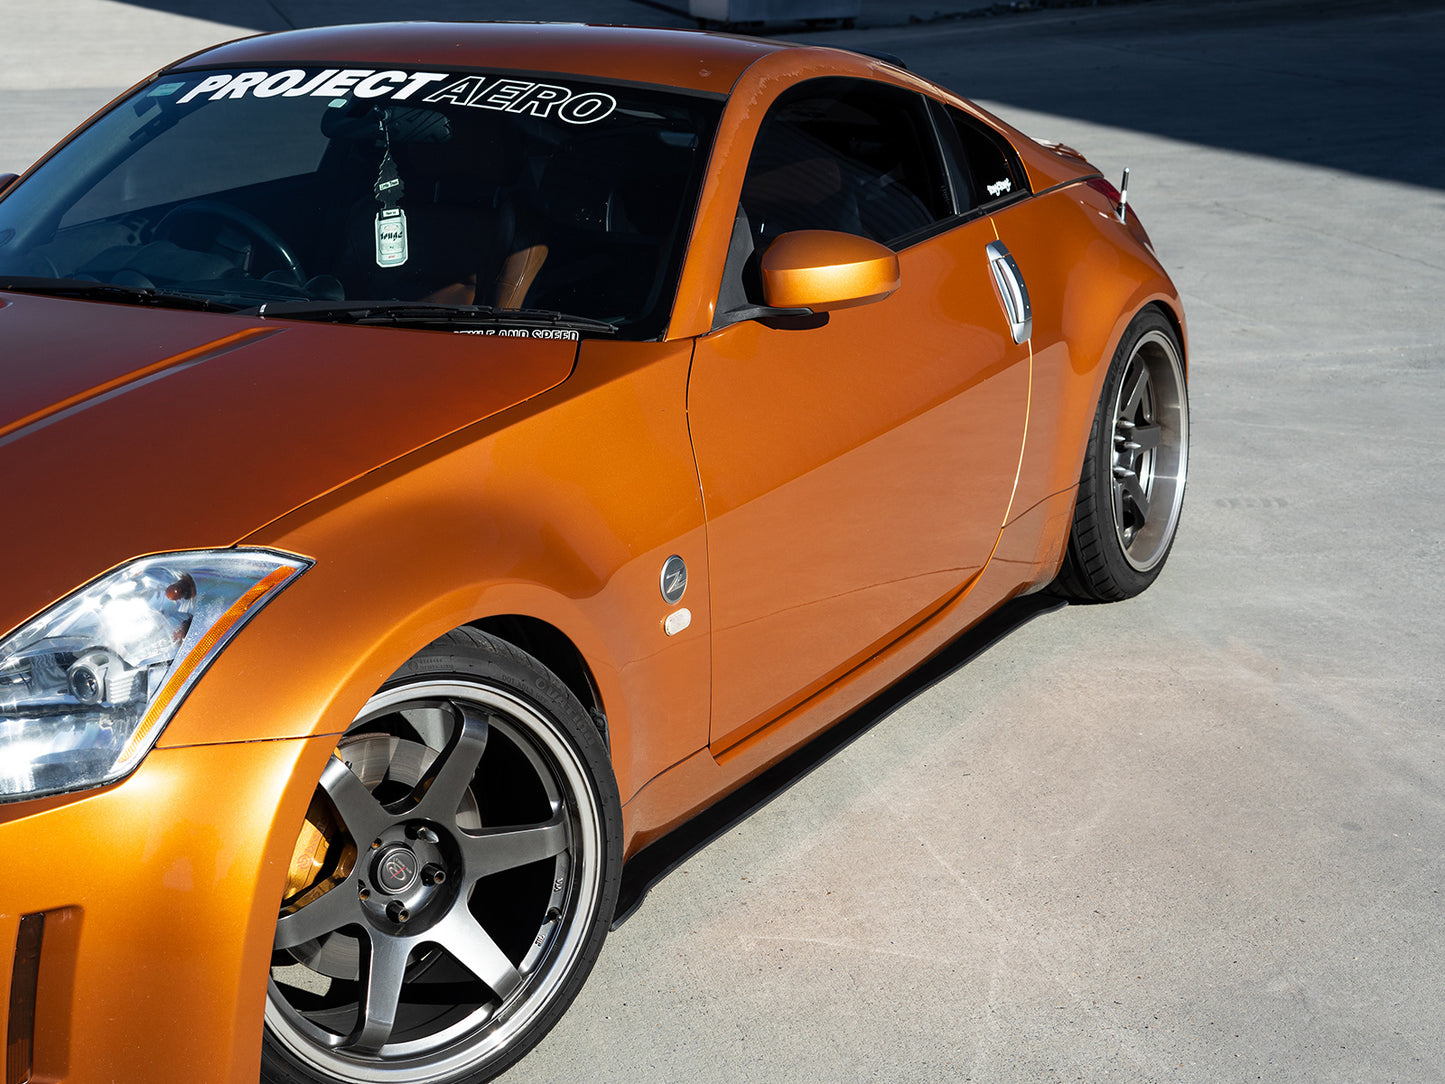 Project Aero 350z side skirt extensions compliment the factory side skirts and give your car a nice subtle aggressive look